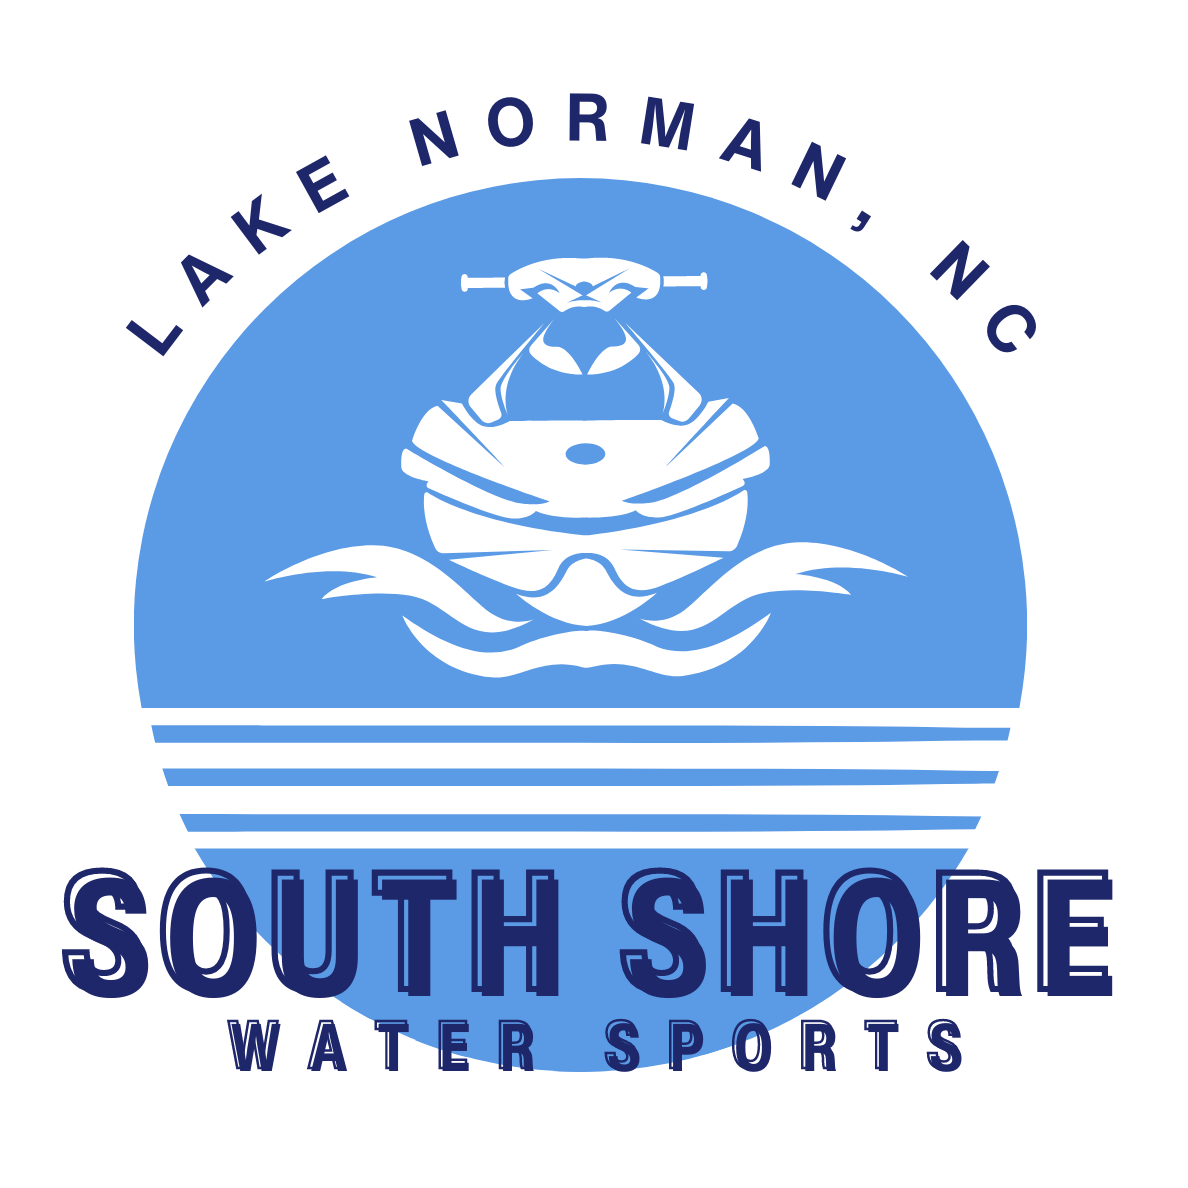 South Shore Water Sports